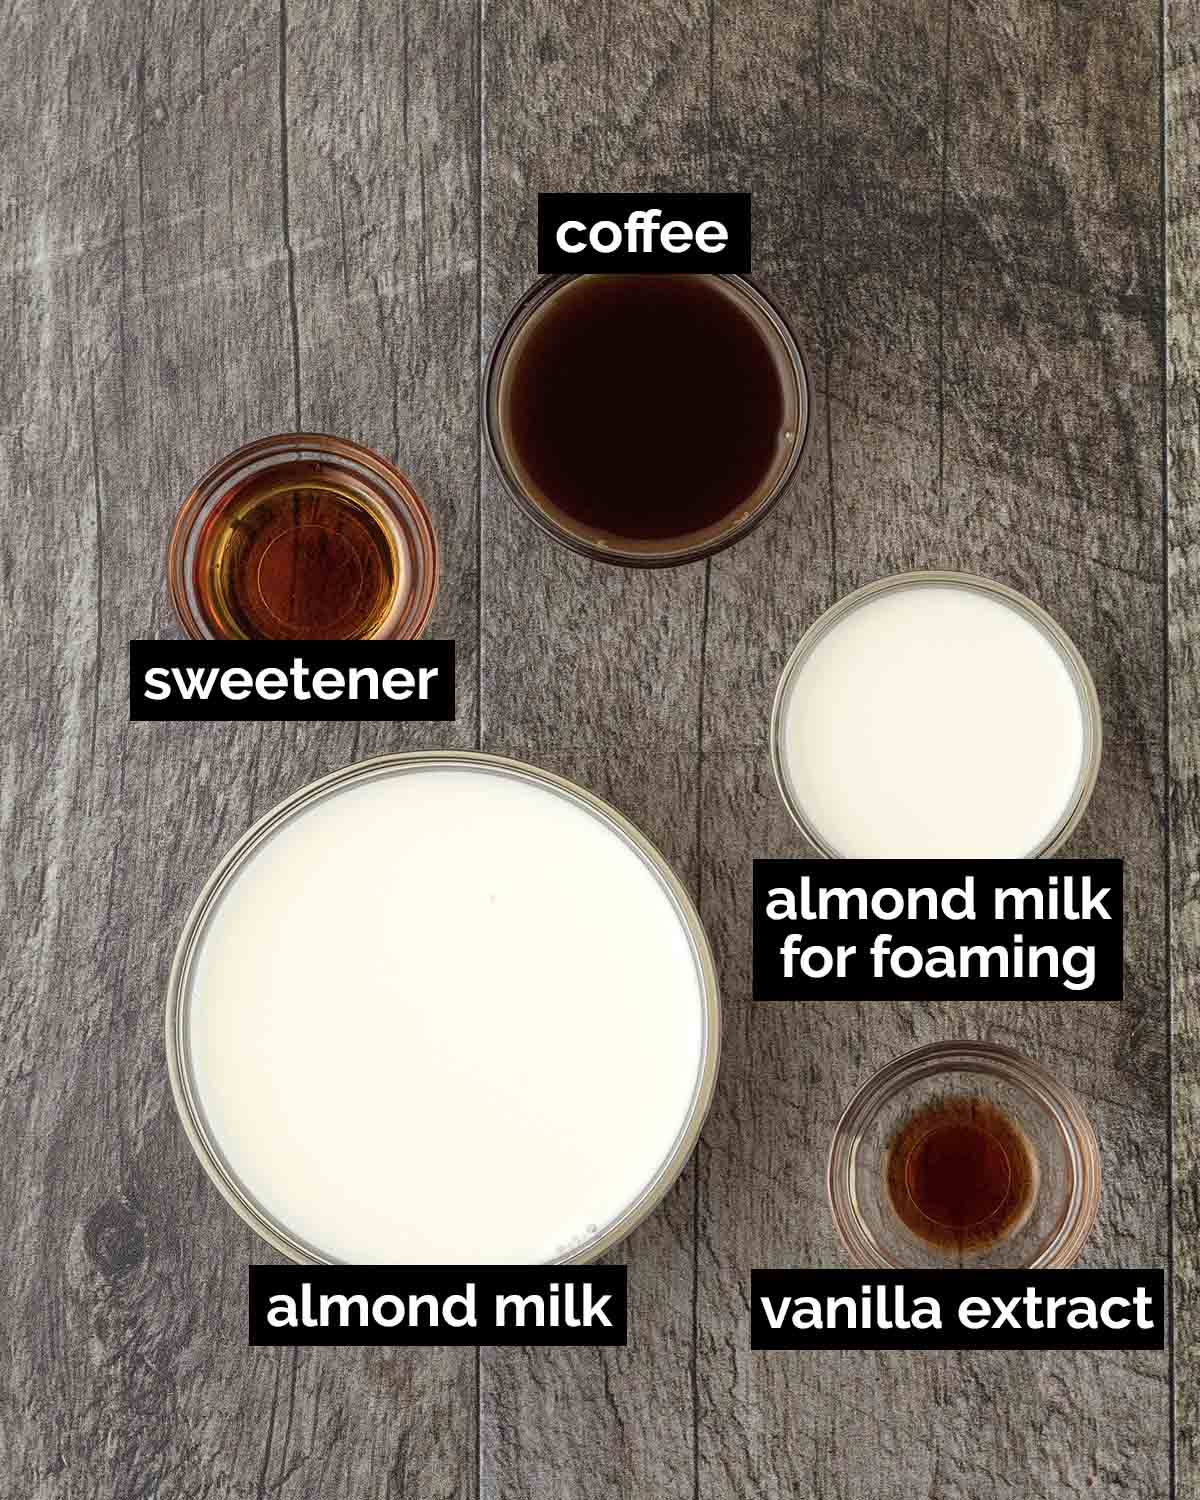 Almond milk and coffee – how to get it right